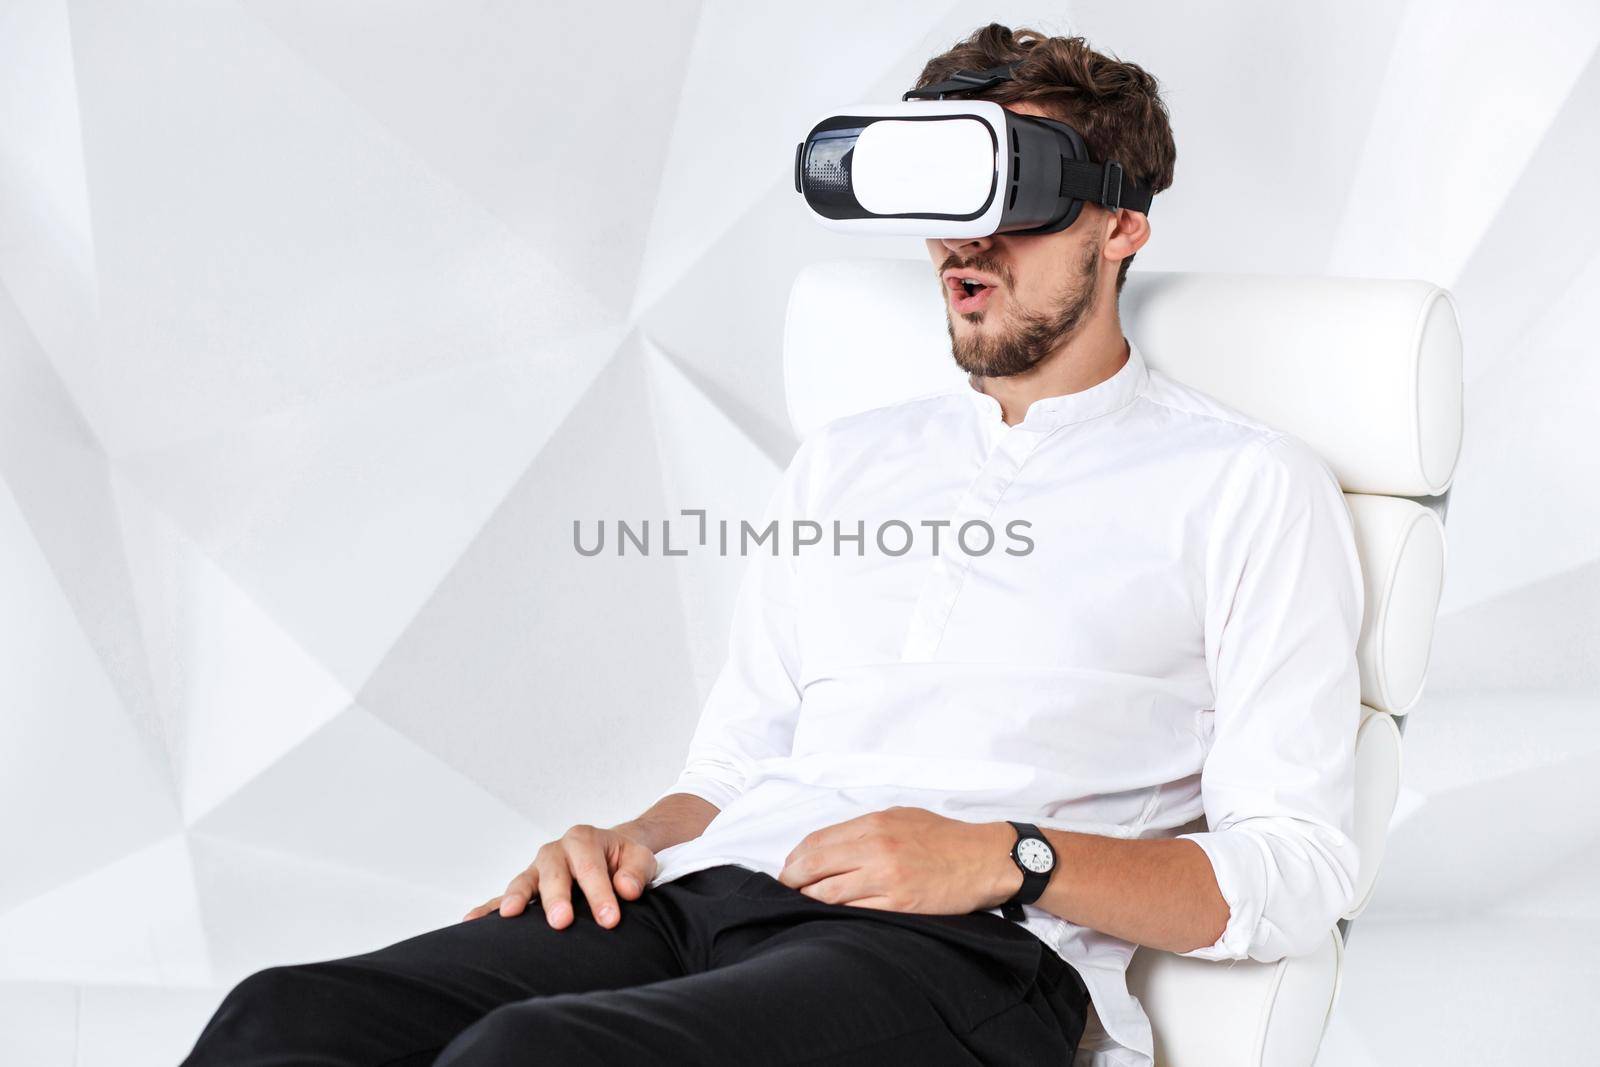 Excited young man is getting experience using VR-headset glasses of virtual reality gesticulating with his hands. A young man sits on a comfortable armchair in a room with white walls